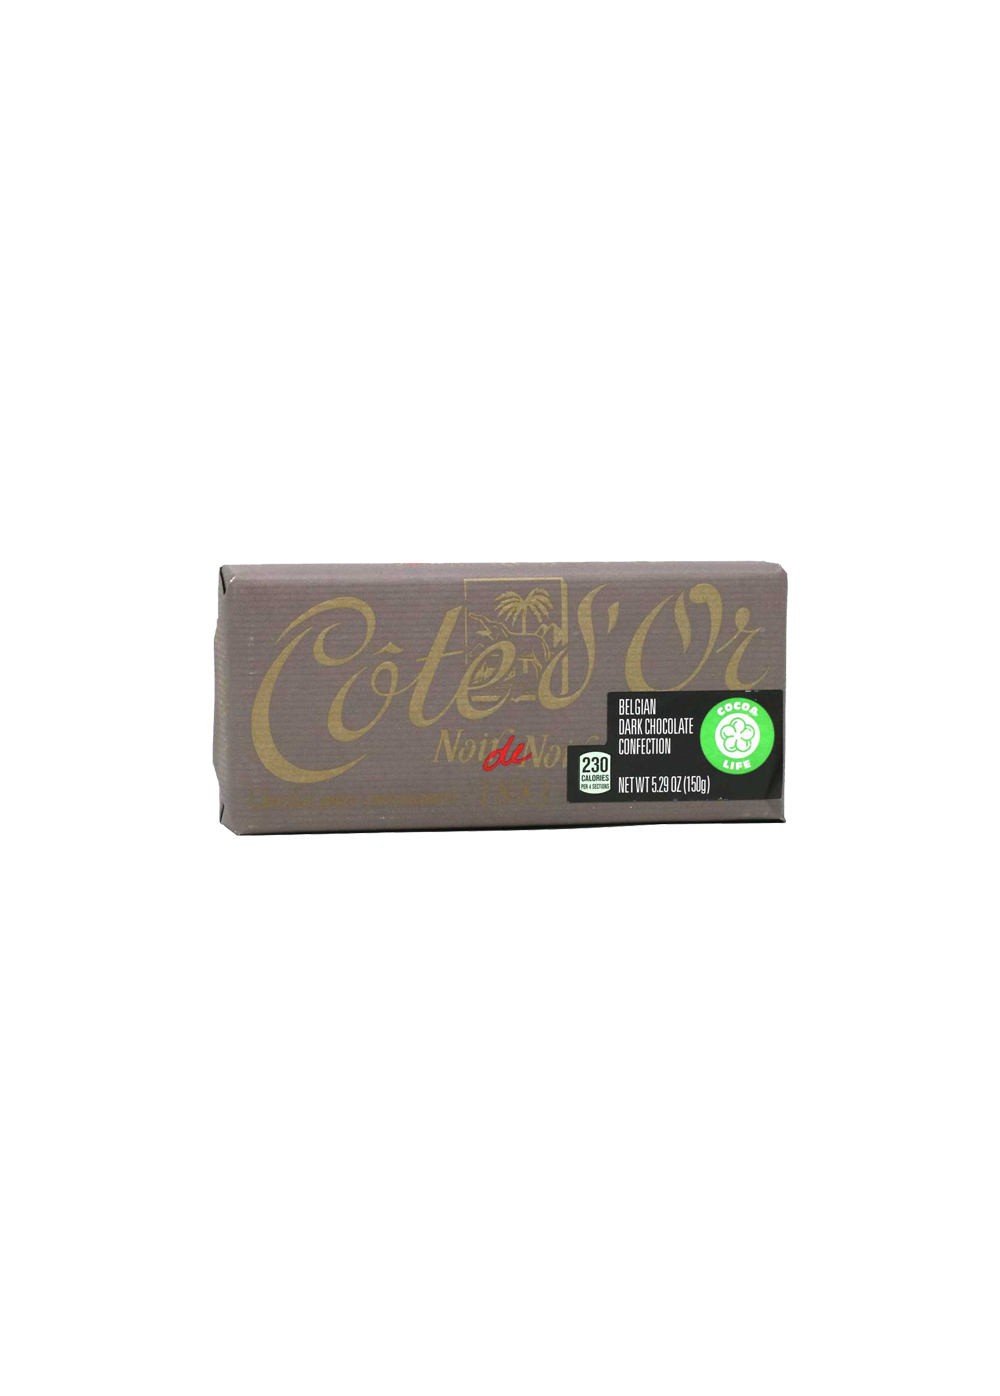 Cote D'or Belgian Dark Chocolate Confection 150g